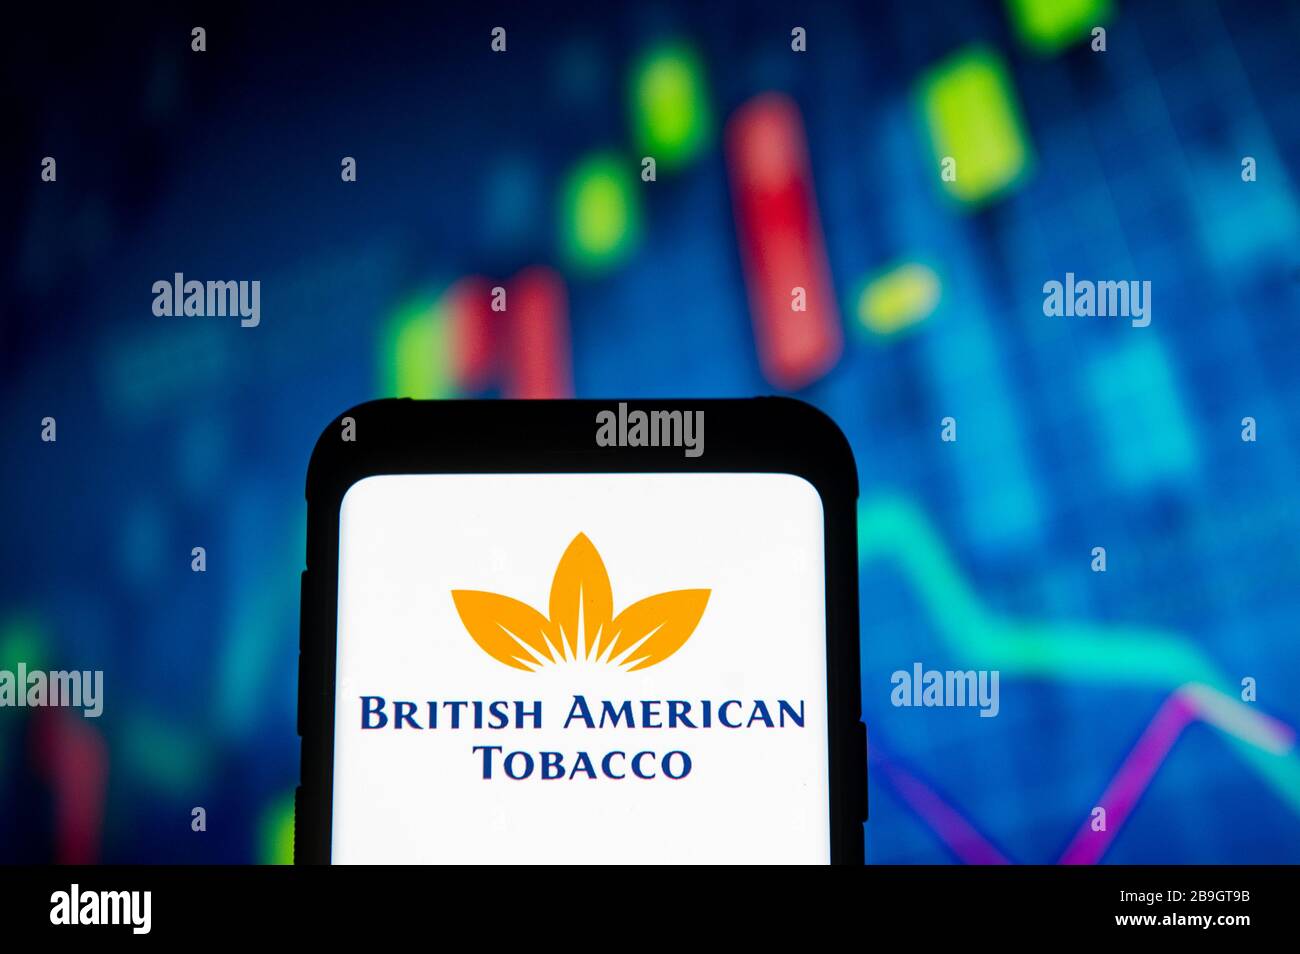 March 23, 2020, Poland: In this photo illustration a British American Tobacco logo seen displayed on a smartphone..A stock market chart is being displayed as the background. (Credit Image: © Mateusz Slodkowski/SOPA Images via ZUMA Wire) Stock Photo